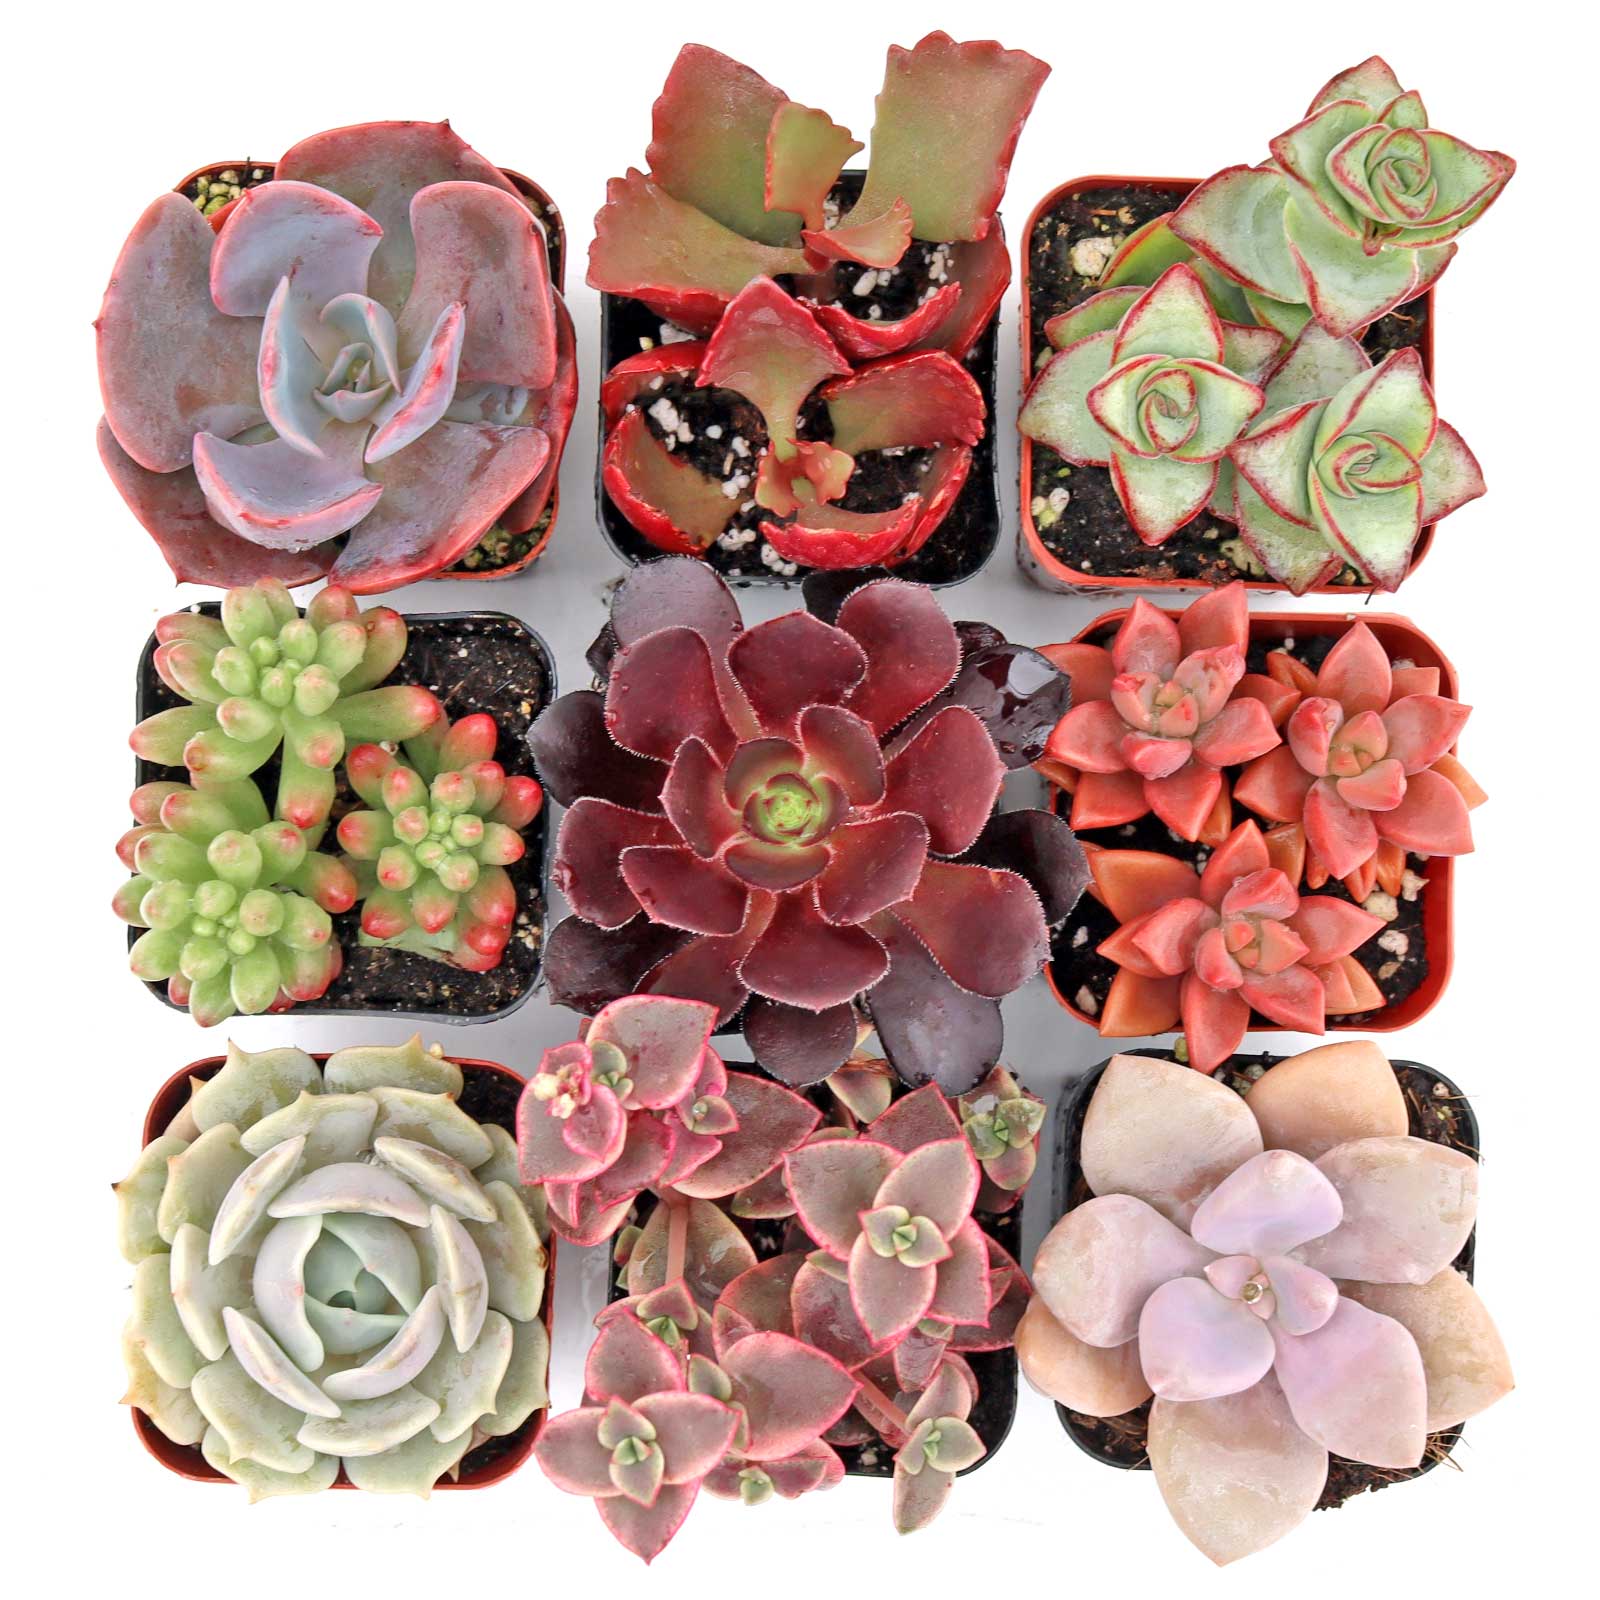 if I purchase the Sweetheart Succulents 9 items, what size pot would you use for all 9 ?